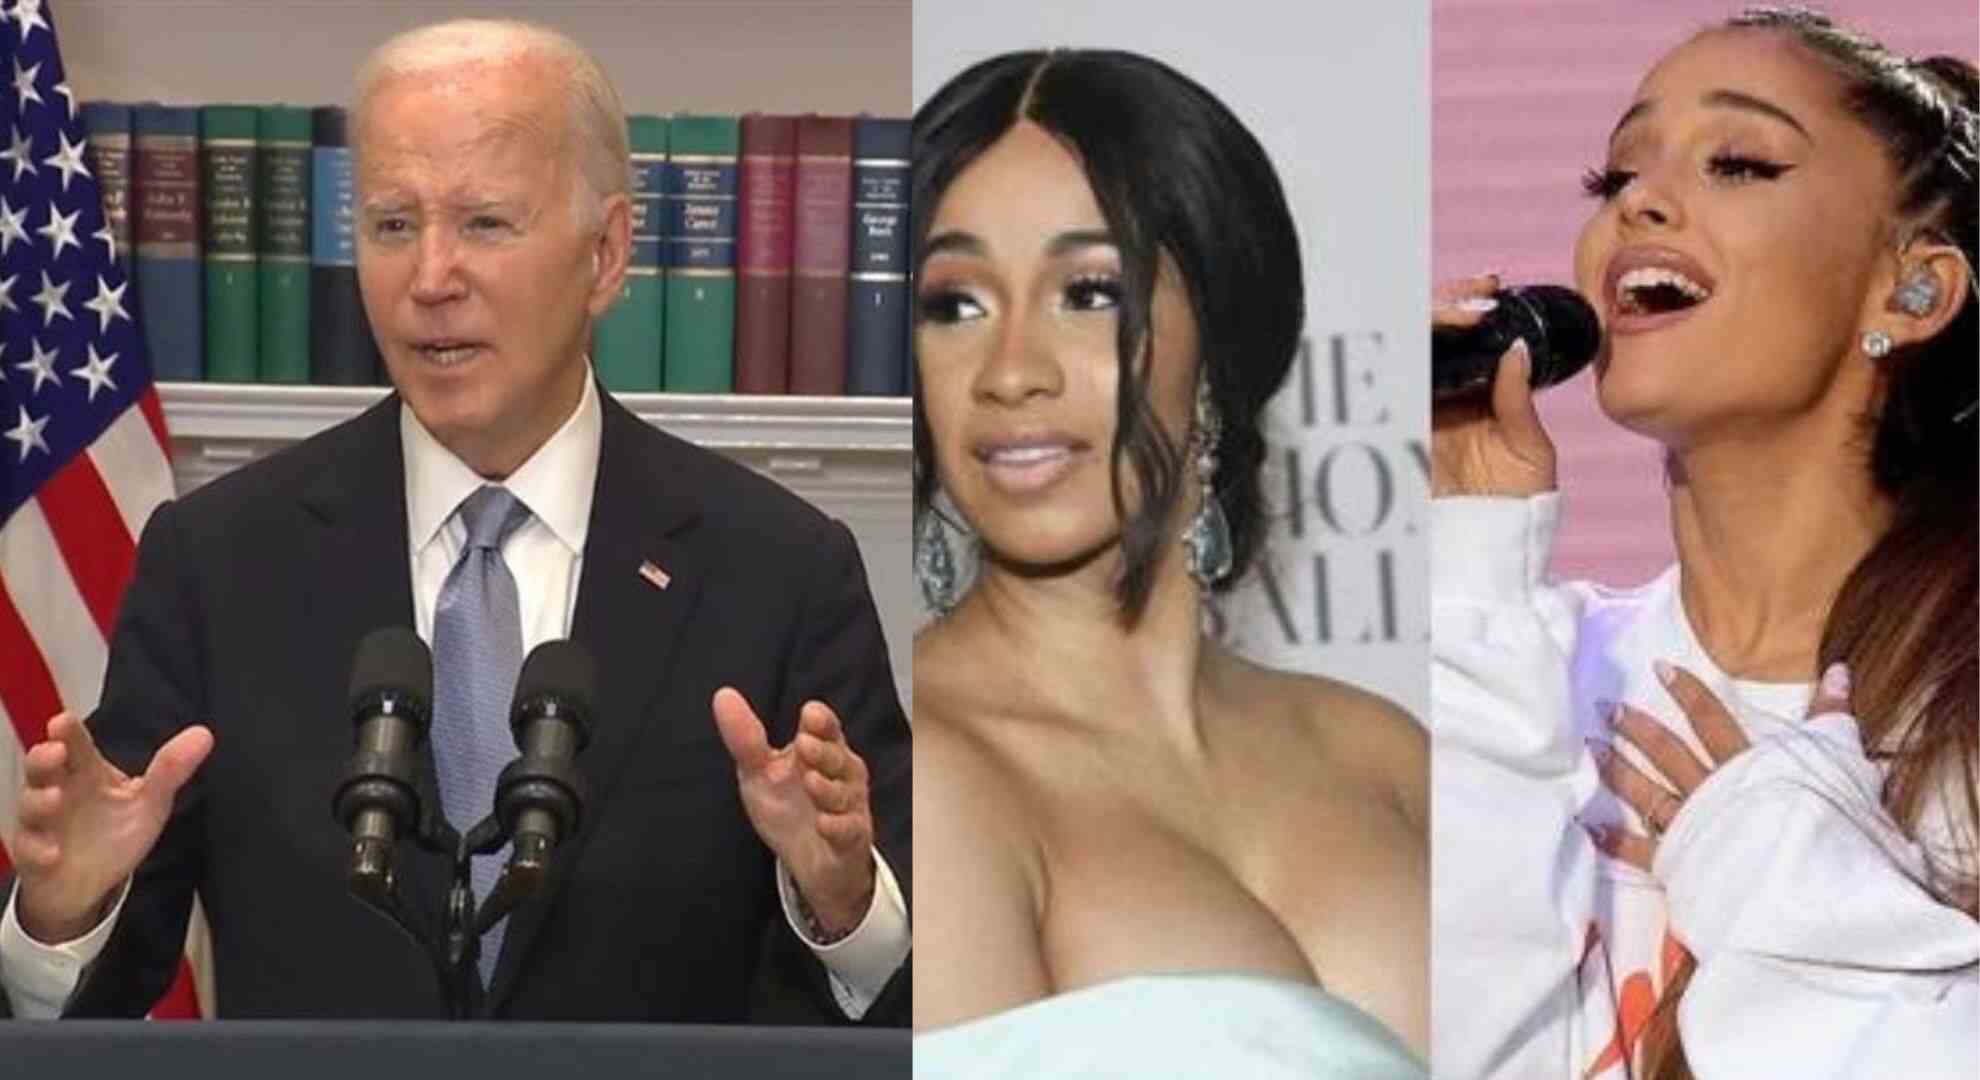 Hollywood Reacts: Cardi B, Ellen DeGeneres, And More Respond To Biden’s Exit from Presidential Race